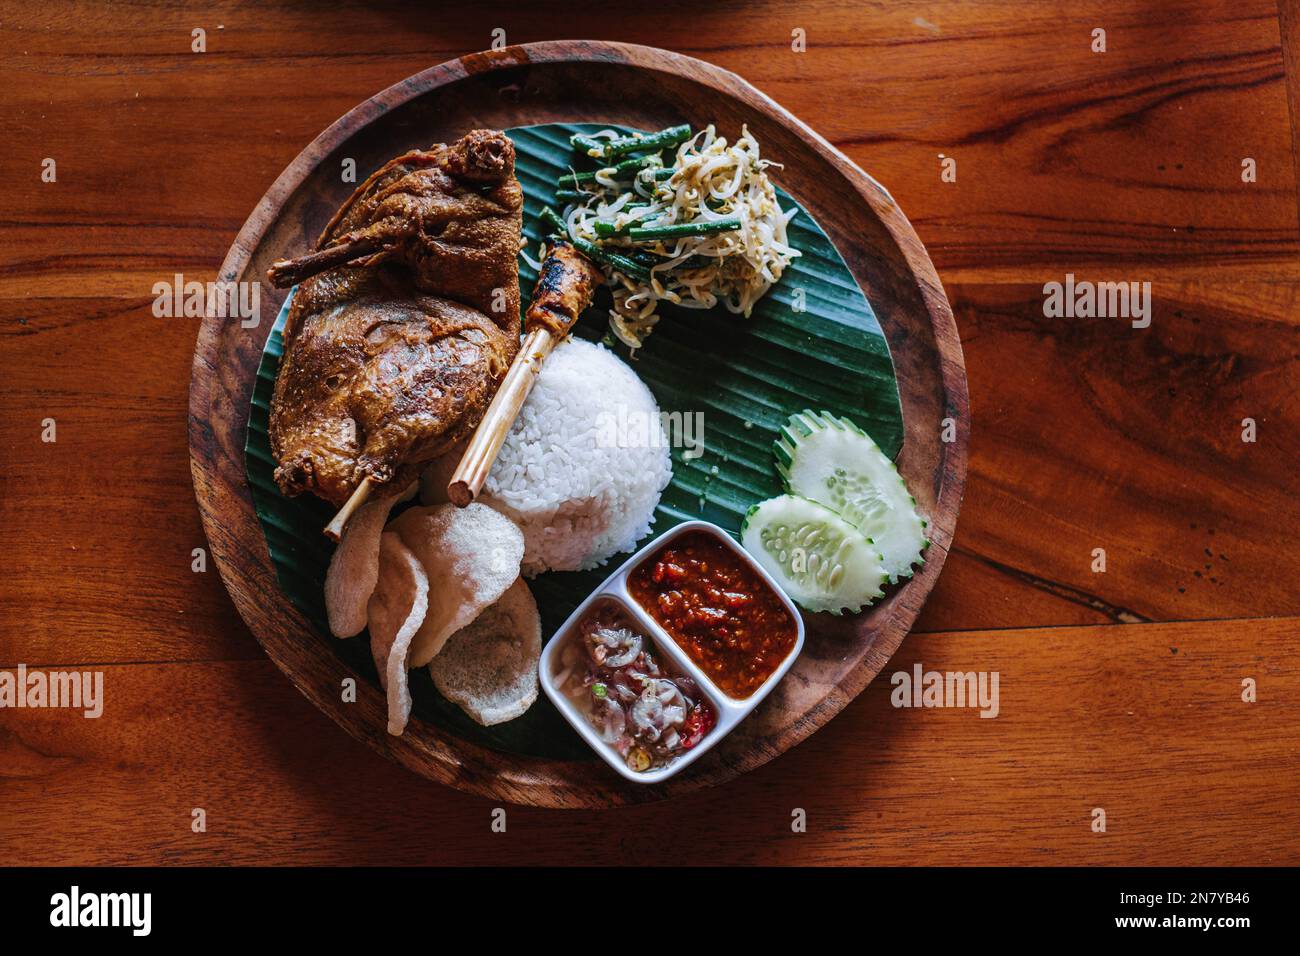 A wooden plate of deep-fried duck with rice, vegetables, chili and crackers. Bebek goreng. Flat lay or top view. Indonesian dish. Stock Photo